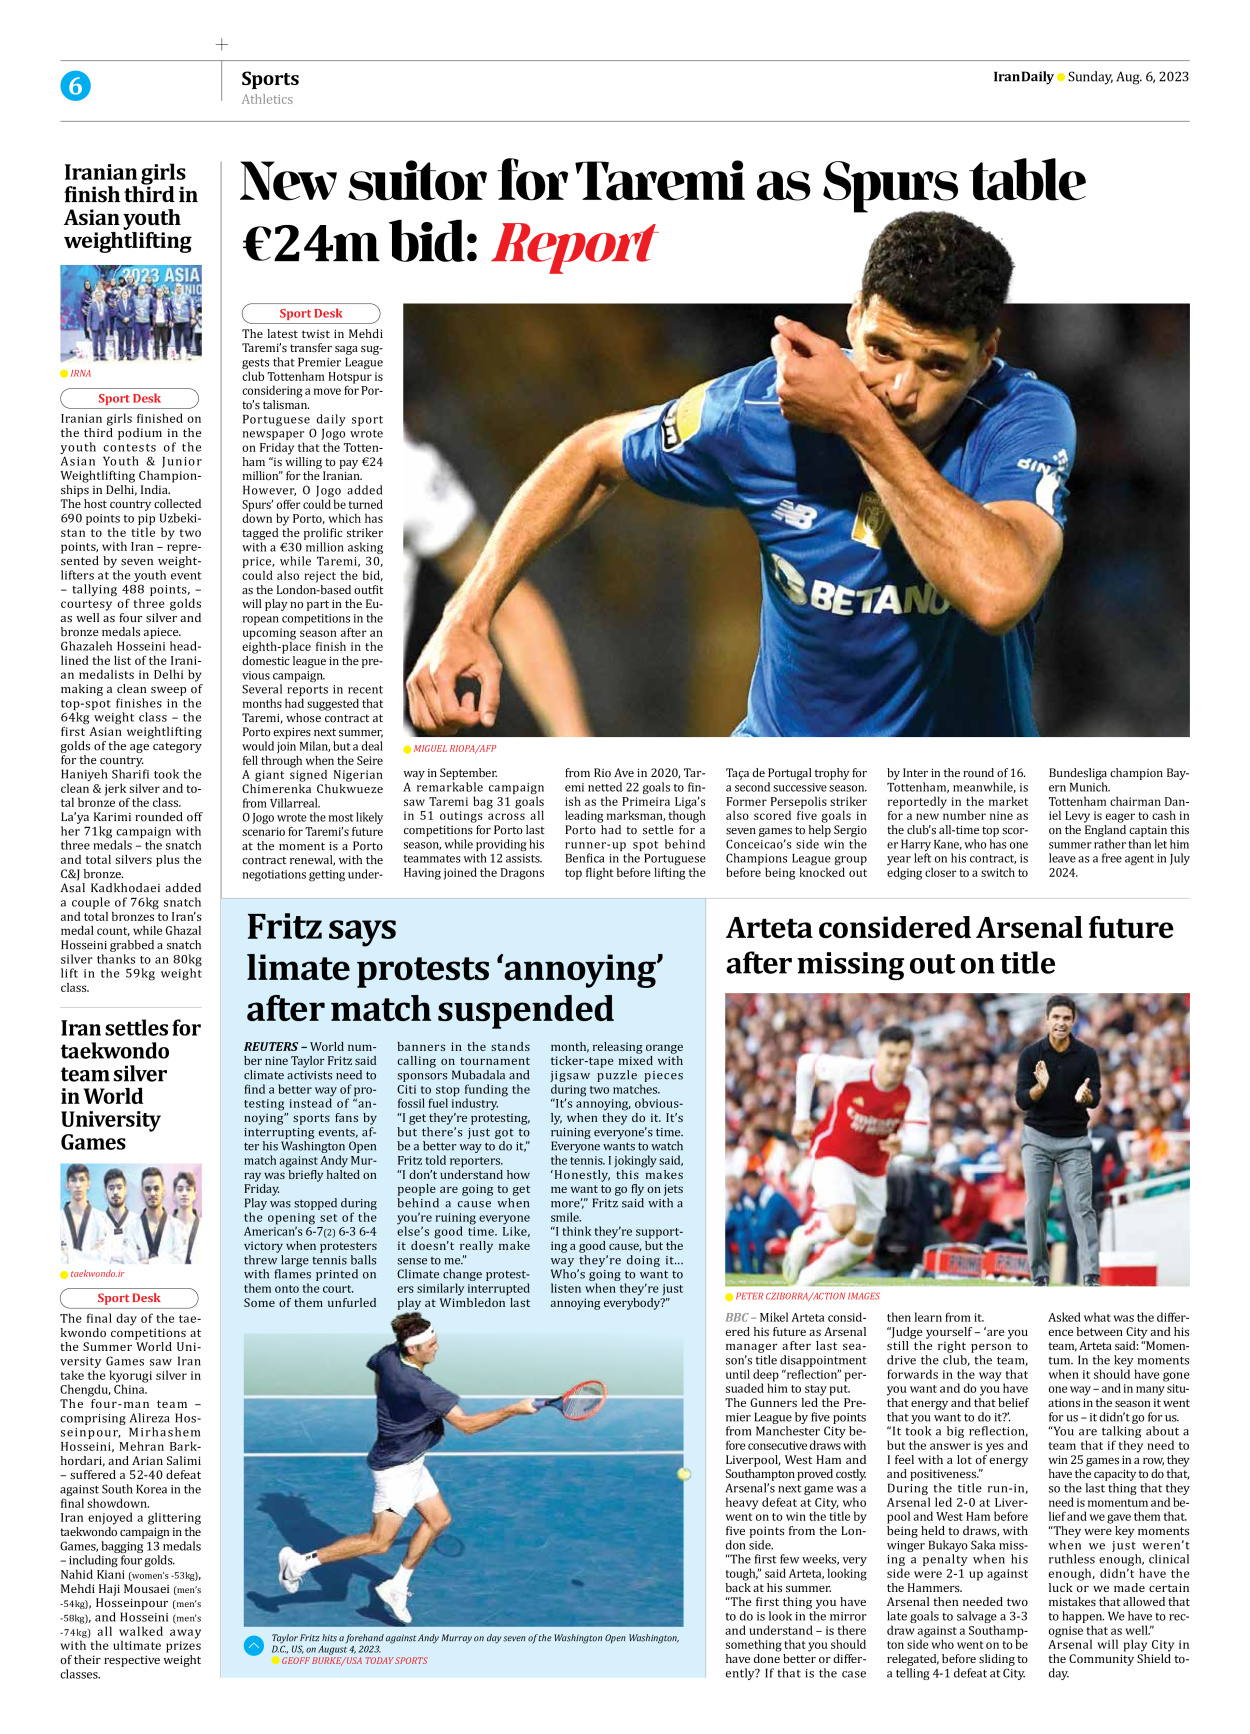 Iran Daily - Number Seven Thousand Three Hundred and Fifty Five - 06 August 2023 - Page 6